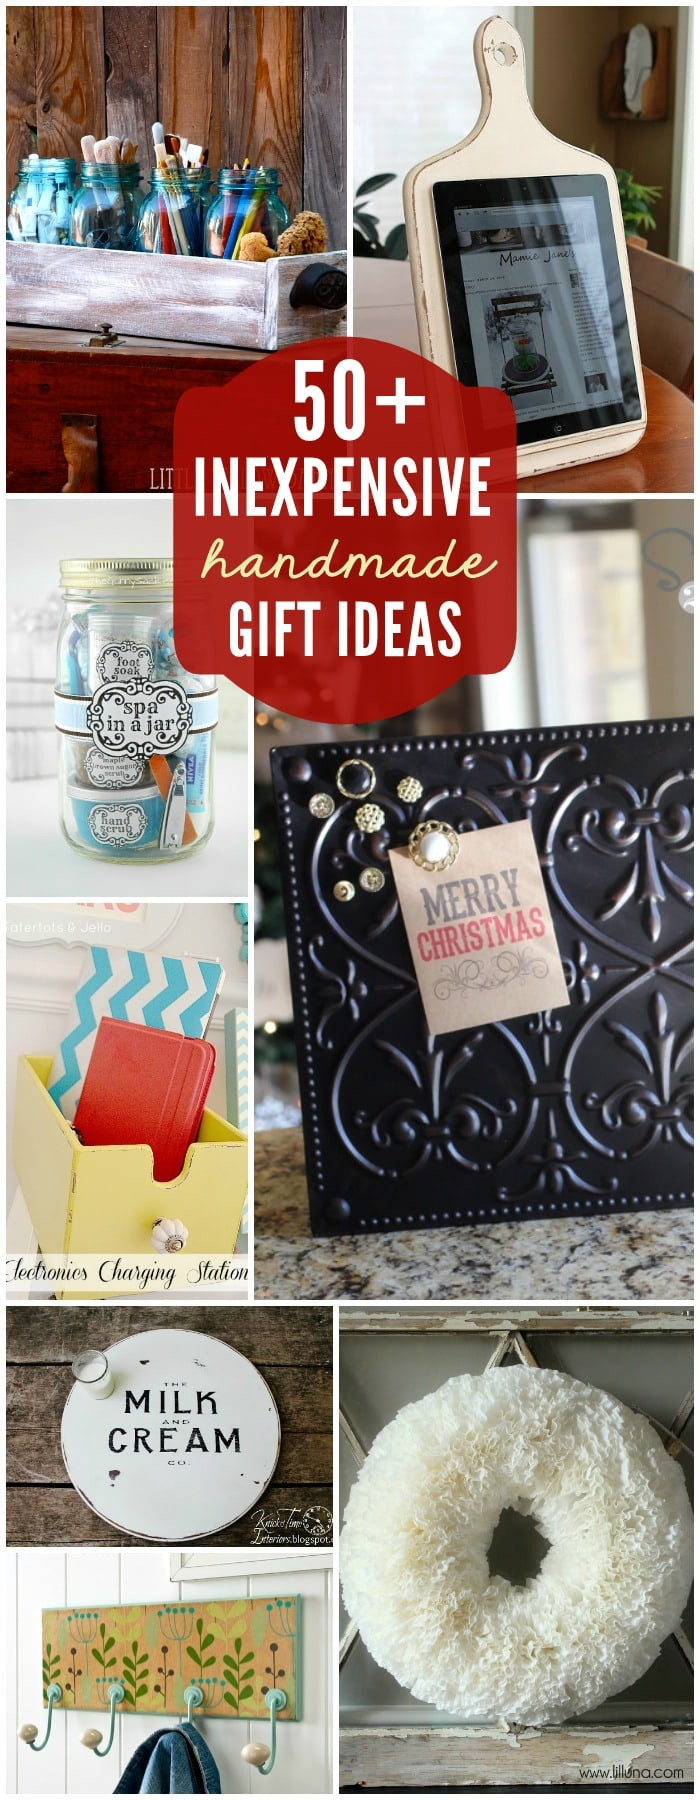 Diy Holiday Gift Ideas
 75 DIY Gifts For Kids